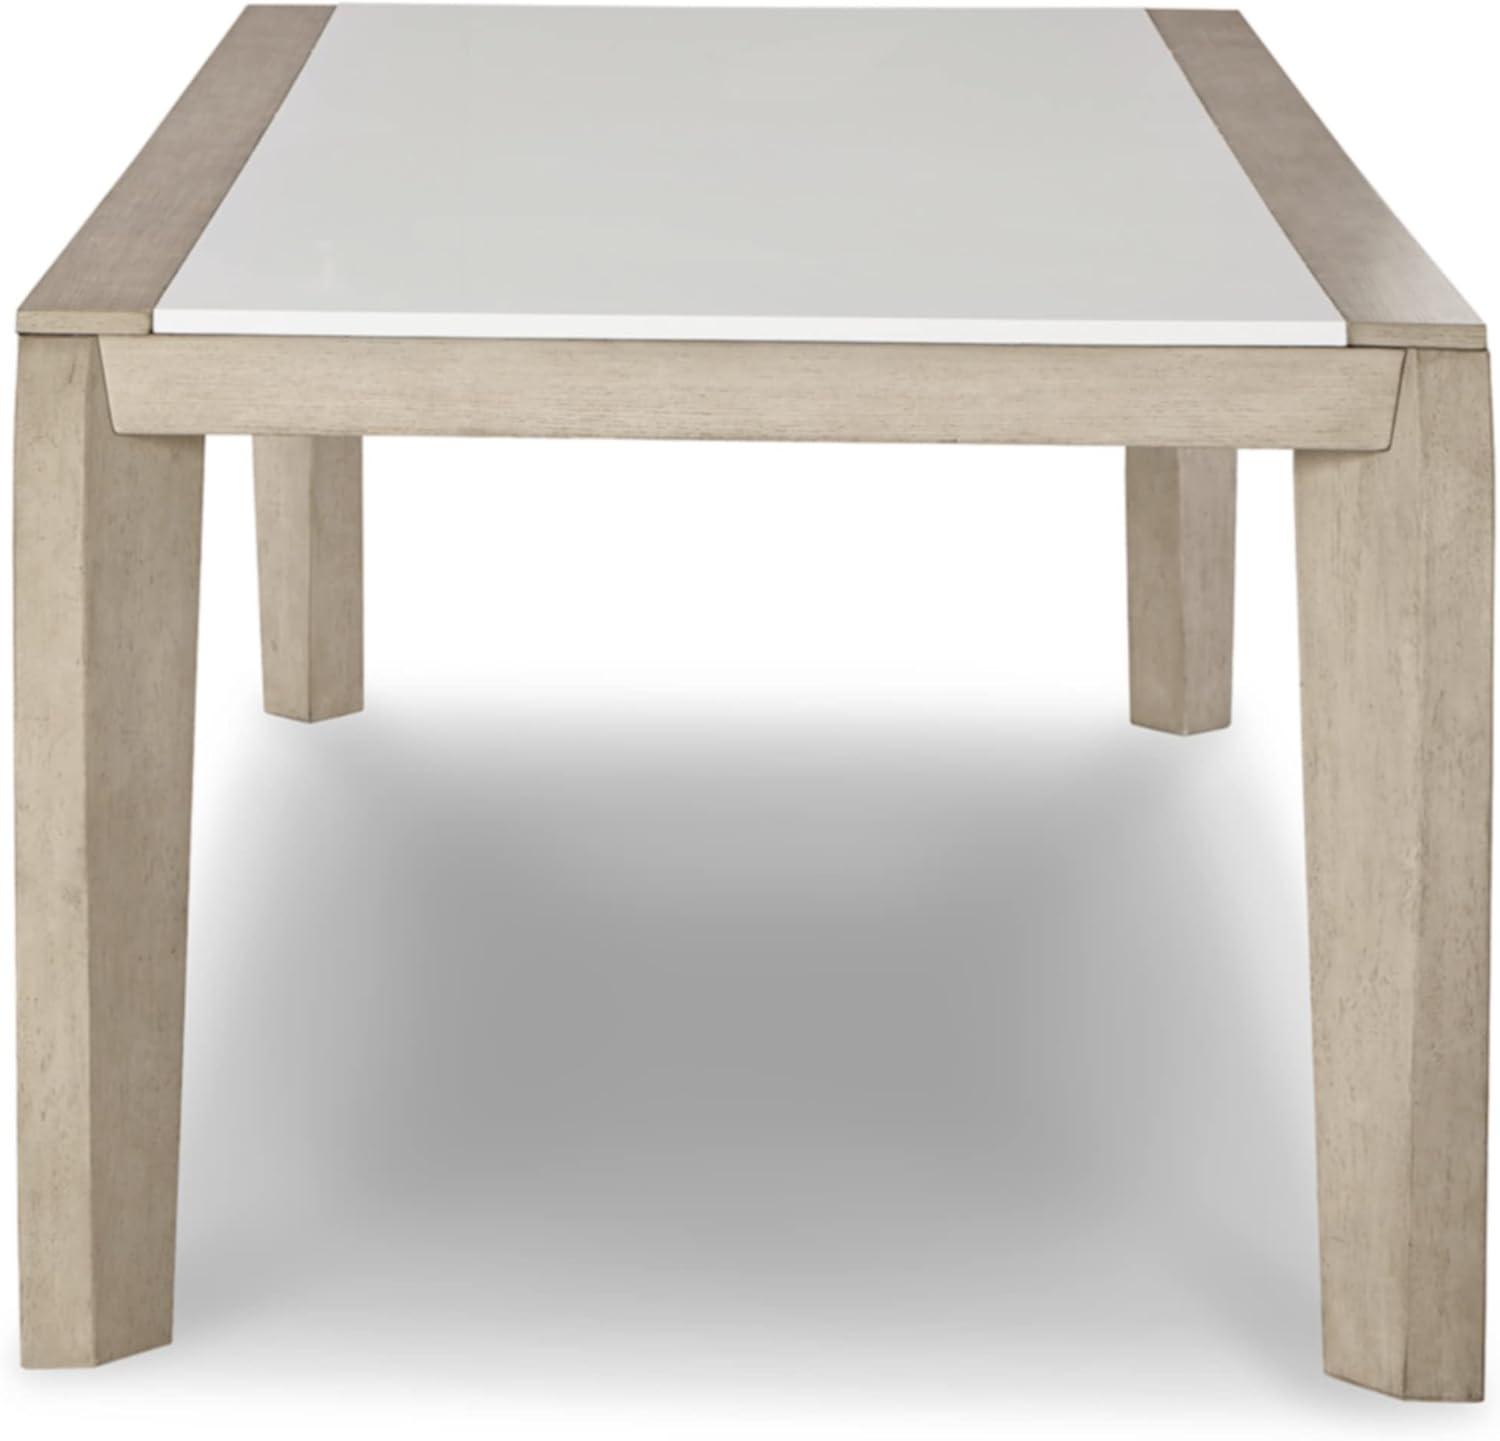 Contemporary Beige & White Wood Dining Table with Acrylic Insert